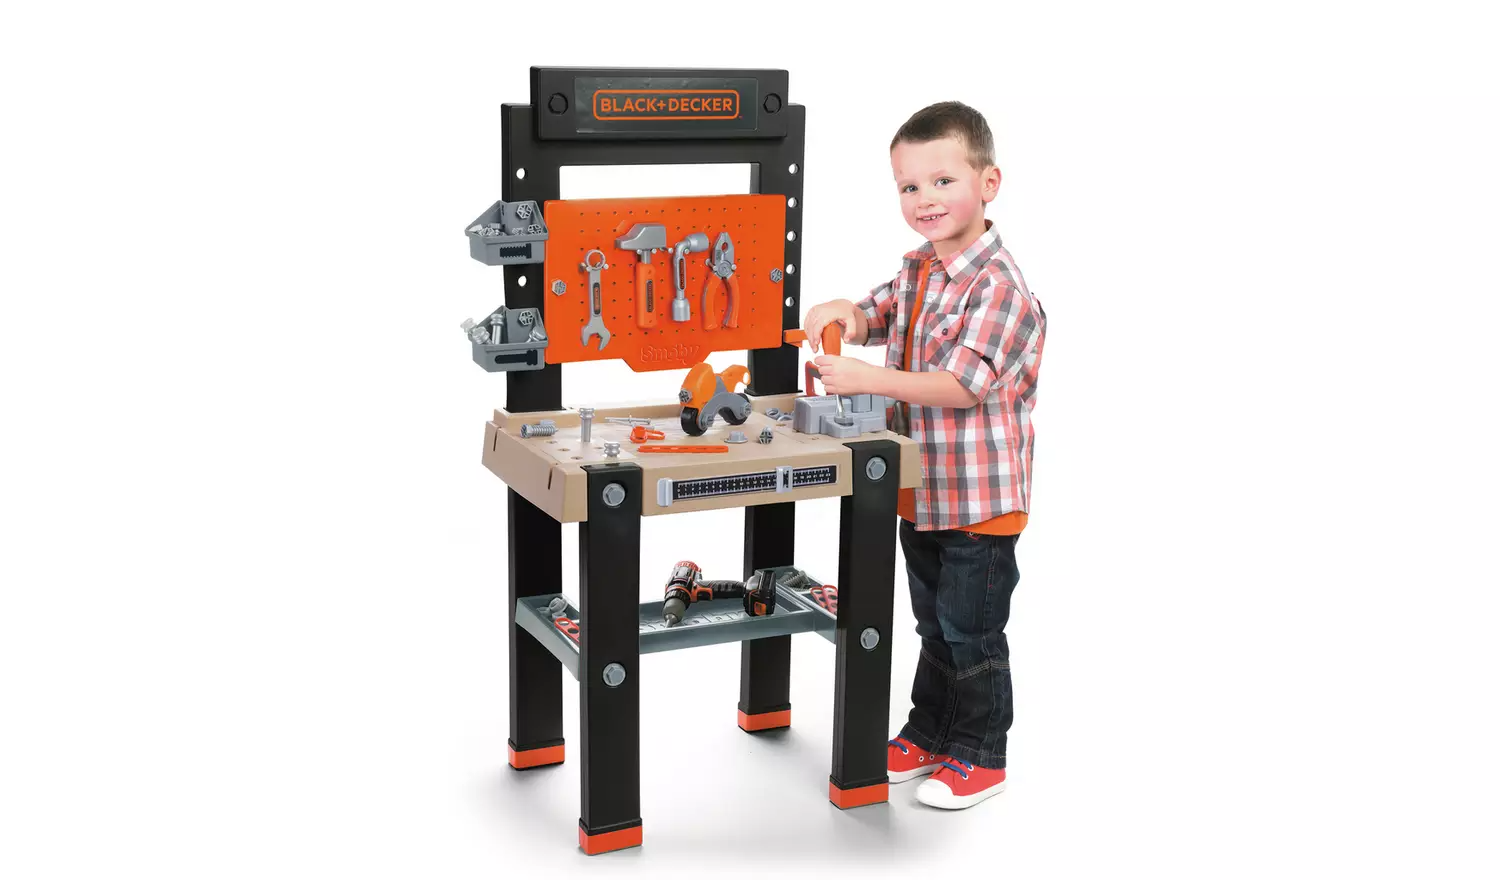 Smoby Giant Black and Decker Toy Workbench